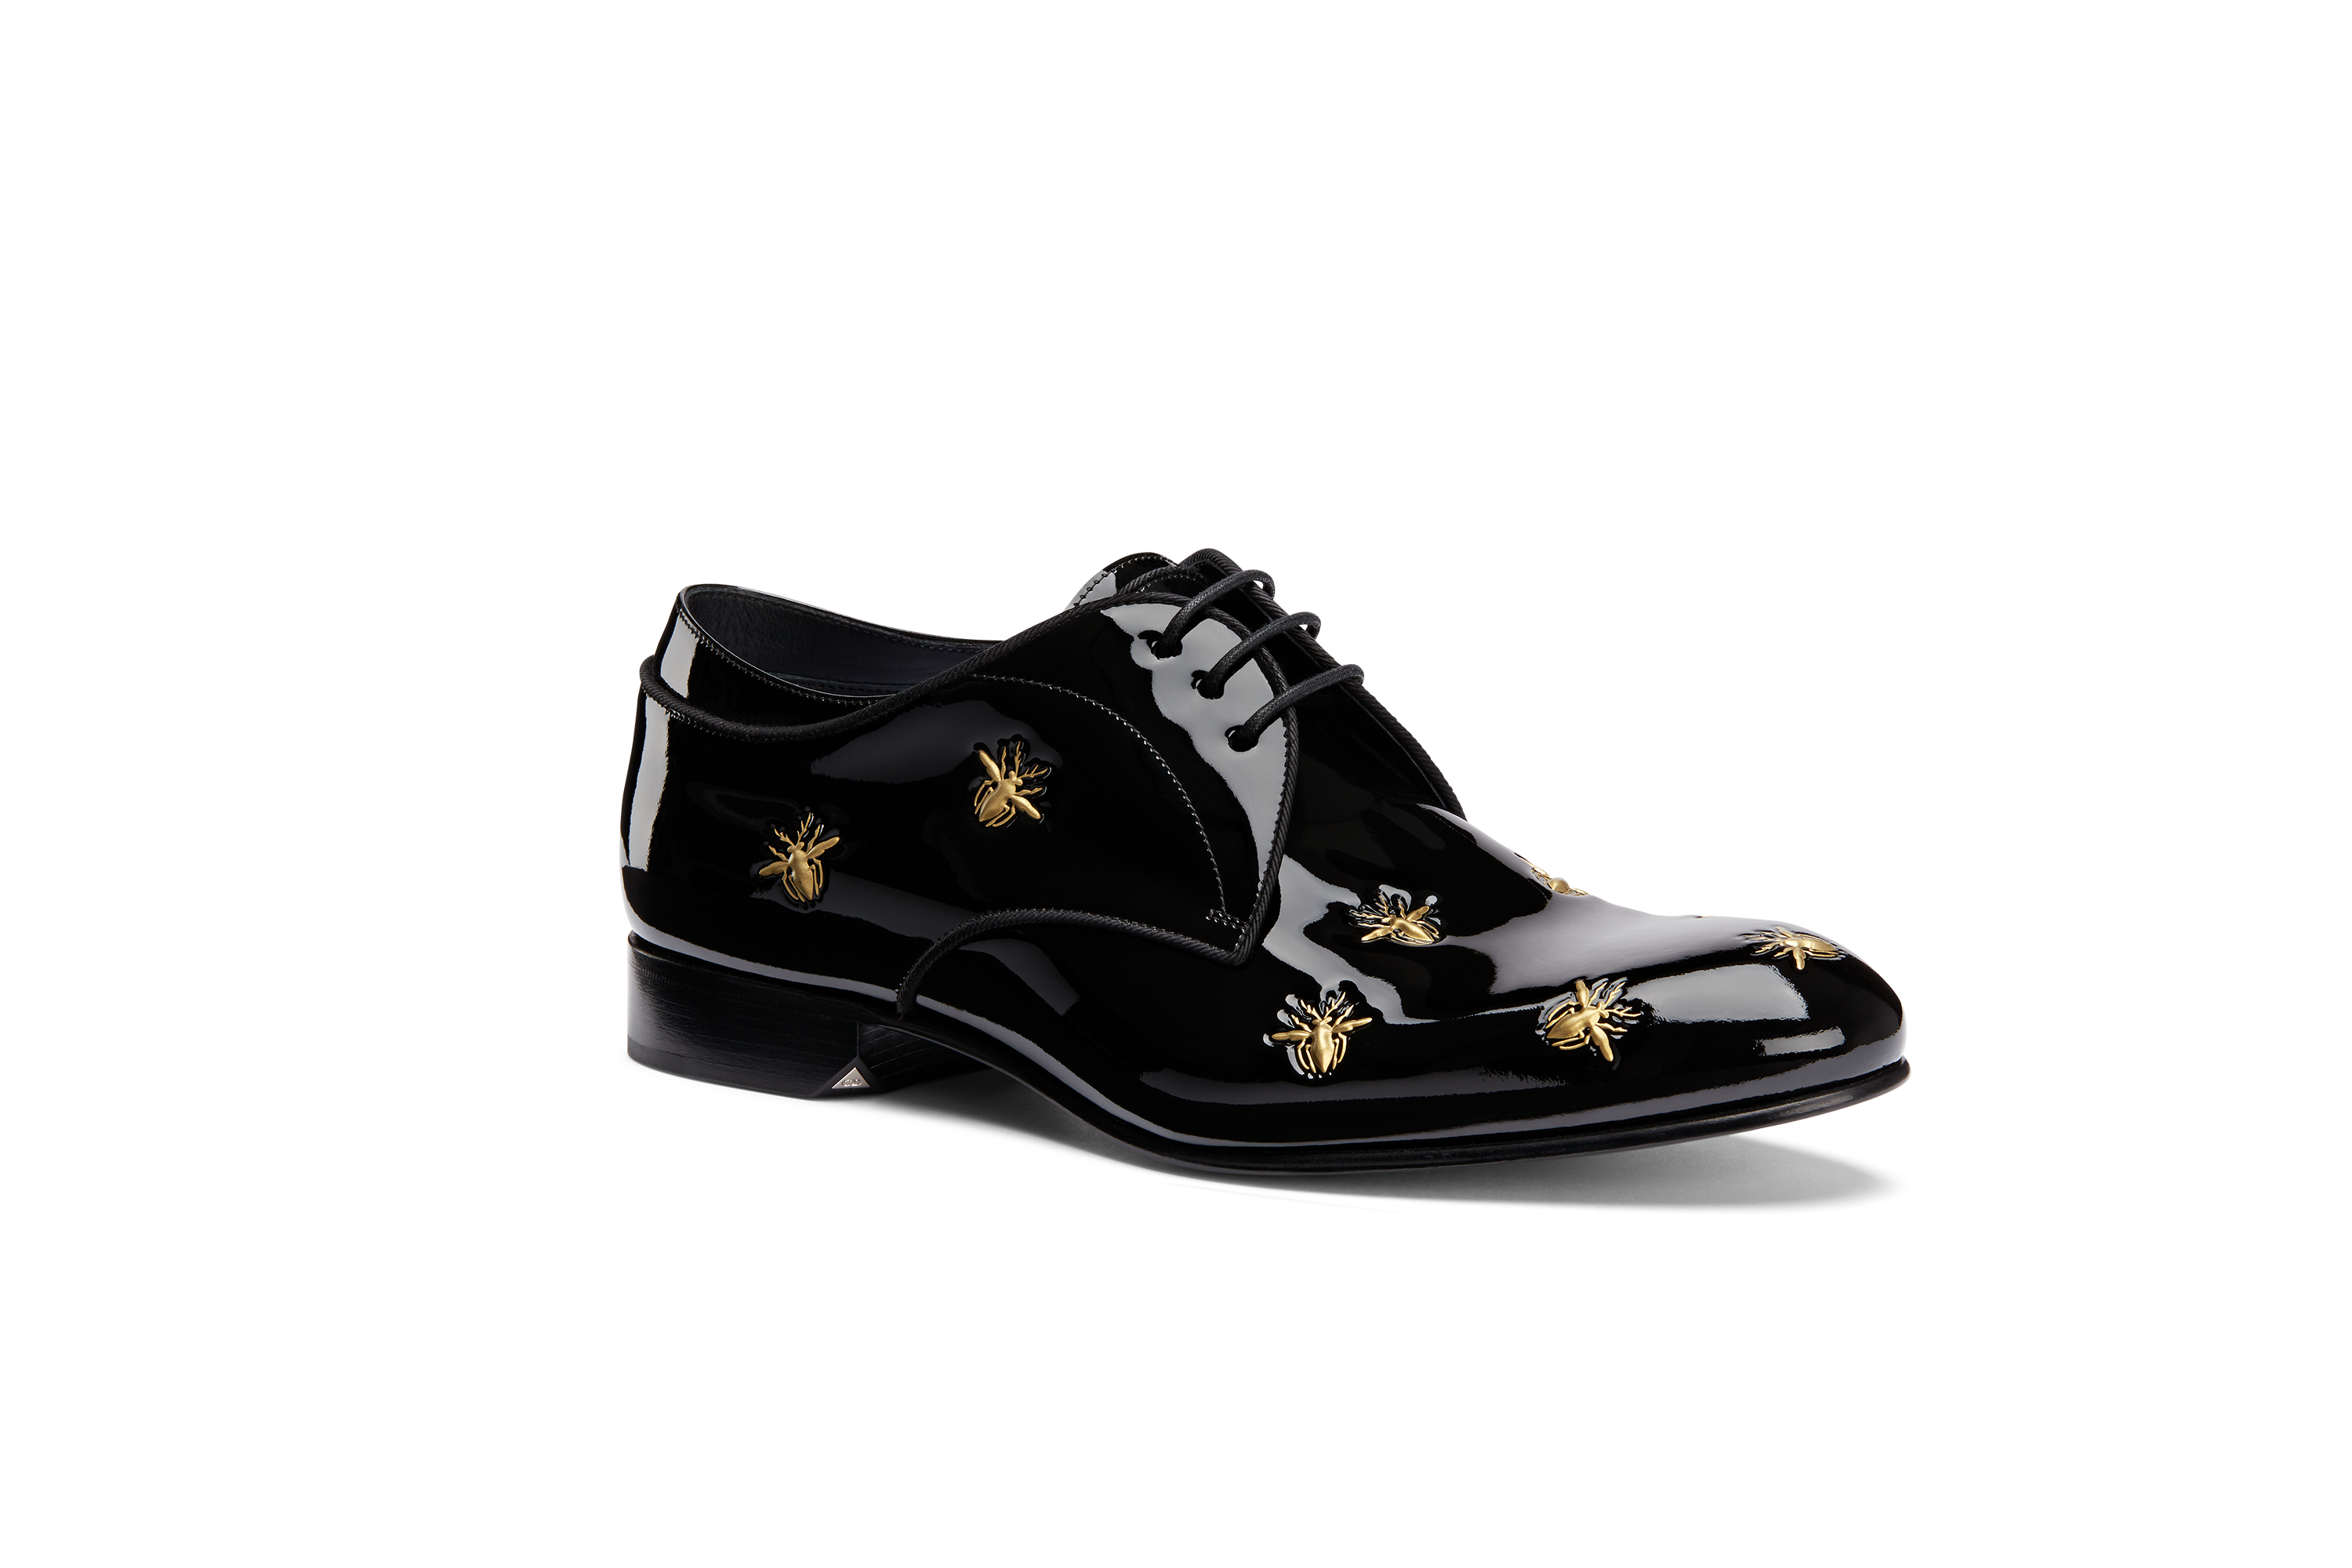 Dior. With gold-tone bee embroidery, this pair of black patent calfskin Derbies with grosgrain edging details is a great choice for celebration, HK$8,000